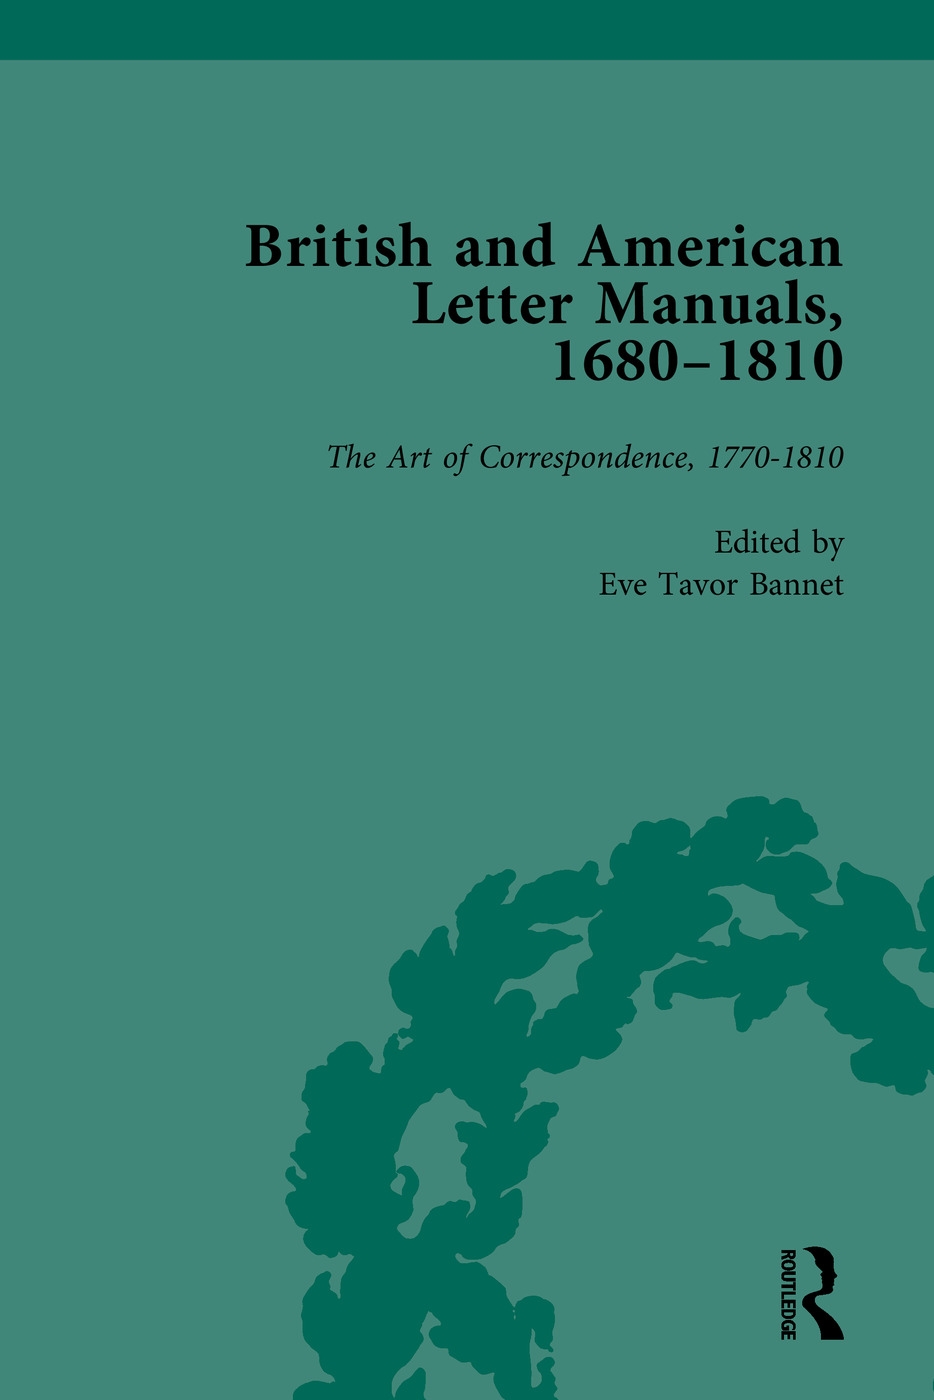 British and American Letter Manuals 1680-1810